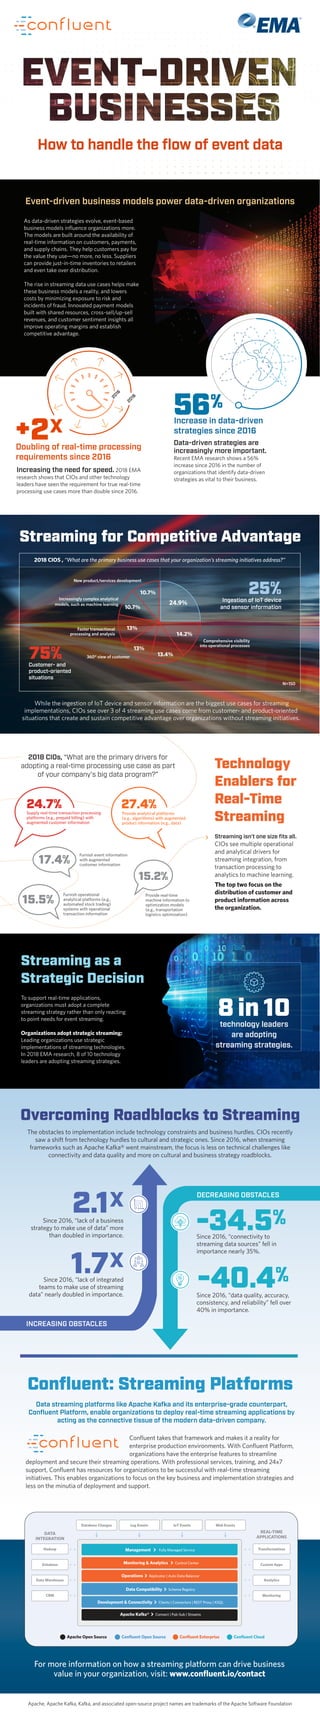 Data-driven strategies are
increasingly more important.
Recent EMA research shows a 56%
increase since 2016 in the number of
organizations that identify data-driven
strategies as vital to their business.
Increasing the need for speed. 2018 EMA
research shows that CIOs and other technology
leaders have seen the requirement for true real-time
processing use cases more than double since 2016.
While the ingestion of IoT device and sensor information are the biggest use cases for streaming
implementations, CIOs see over 3 of 4 streaming use cases come from customer- and product-oriented
situations that create and sustain competitive advantage over organizations without streaming initiatives.
The obstacles to implementation include technology constraints and business hurdles. CIOs recently
saw a shift from technology hurdles to cultural and strategic ones. Since 2016, when streaming
frameworks such as Apache Kafka® went mainstream, the focus is less on technical challenges like
connectivity and data quality and more on cultural and business strategy roadblocks.
As data-driven strategies evolve, event-based
business models inﬂuence organizations more.
The models are built around the availability of
real-time information on customers, payments,
and supply chains. They help customers pay for
the value they use—no more, no less. Suppliers
can provide just-in-time inventories to retailers
and even take over distribution.
The rise in streaming data use cases helps make
these business models a reality, and lowers
costs by minimizing exposure to risk and
incidents of fraud. Innovated payment models
built with shared resources, cross-sell/up-sell
revenues, and customer sentiment insights all
improve operating margins and establish
competitive advantage.
Event-driven business models power data-driven organizations
Increase in data-driven
strategies since 2016
56%
Streaming for Competitive Advantage
Doubling of real-time processing
requirements since 2016
2018 CIOS , “What are the primary business use cases that your organization’s streaming initiatives address?”
+2X
2018
2016
Technology
Enablers for
Real-Time
Streaming
Overcoming Roadblocks to Streaming
2018 CIOs, “What are the primary drivers for
adopting a real-time processing use case as part
of your company’s big data program?”
Streaming isn’t one size ﬁts all.
CIOs see multiple operational
and analytical drivers for
streaming integration, from
transaction processing to
analytics to machine learning.
The top two focus on the
distribution of customer and
product information across
the organization.
Since 2016, “lack of a business
strategy to make use of data” more
than doubled in importance.
2.1X
Since 2016, “lack of integrated
teams to make use of streaming
data” nearly doubled in importance.
1.7X
Since 2016, “connectivity to
streaming data sources” fell in
importance nearly 35%.
-34.5%
Since 2016, “data quality, accuracy,
consistency, and reliability” fell over
40% in importance.
-40.4%
DECREASING OBSTACLES
INCREASING OBSTACLES
How to handle the ﬂow of event data
Comprehensive visibility
into operational processes
Provide analytical platforms
(e.g., algorithms) with augmented
product information (e.g., data)
Supply real-time transaction processing
platforms (e.g., prepaid billing) with
augmented customer information
N=150
360° view of customer
Faster transactional
processing and analysis
Increasingly complex analytical
models, such as machine learning
New product/services development
Ingestion of IoT device
and sensor information10.7%
10.7%
13.4%
14.2%
13%
13%
24.9%
75%
25%
Customer- and
product-oriented
situations
Streaming as a
Strategic Decision
To support real-time applications,
organizations must adopt a complete
streaming strategy rather than only reacting
to point needs for event streaming.
Organizations adopt strategic streaming:
Leading organizations use strategic
implementations of streaming technologies.
In 2018 EMA research, 8 of 10 technology
leaders are adopting streaming strategies.
Furnish event information
with augmented
customer information
Furnish operational
analytical platforms (e.g.,
automated stock trading)
systems with operational
transaction information
Provide real-time
machine information to
optimization models
(e.g., transportation
logistics optimization)
24.7% 27.4%
17.4%
15.5%
15.2%
8 in 10technology leaders
are adopting
streaming strategies.
Conﬂuent takes that framework and makes it a reality for
enterprise production environments. With Conﬂuent Platform,
organizations have the enterprise features to streamline
deployment and secure their streaming operations. With professional services, training, and 24x7
support, Conﬂuent has resources for organizations to be successful with real-time streaming
initiatives. This enables organizations to focus on the key business and implementation strategies and
less on the minutia of deployment and support.
Data streaming platforms like Apache Kafka and its enterprise-grade counterpart,
Conﬂuent Platform, enable organizations to deploy real-time streaming applications by
acting as the connective tissue of the modern data-driven company.
Hadoop
DATA
INTEGRATION
REAL-TIME
APPLICATIONS
Database
Data Warehouse
CRM
Transformations
Custom Apps
Analytics
Monitoring
Management  Fully Managed Service
Monitoring & Analytics  Control Center
Operations  Replicator | Auto Data Balancer
Data Compatibility  Schema Registry
Development & Connectivity  Clients | Connectors | REST Proxy | KSQL
Apache Kafka®  Connect | Pub-Sub | Streams
• •
• •
• •
• •
• •
• •
• •
• •
Conﬂuent CloudApache Open Source Conﬂuent Open Source Conﬂuent Enterprise
IoT Events Web EventsLog EventsDatabase Changes
For more information on how a streaming platform can drive business
value in your organization, visit: www.conﬂuent.io/contact
Apache, Apache Kafka, Kafka, and associated open-source project names are trademarks of the Apache Software Foundation
 